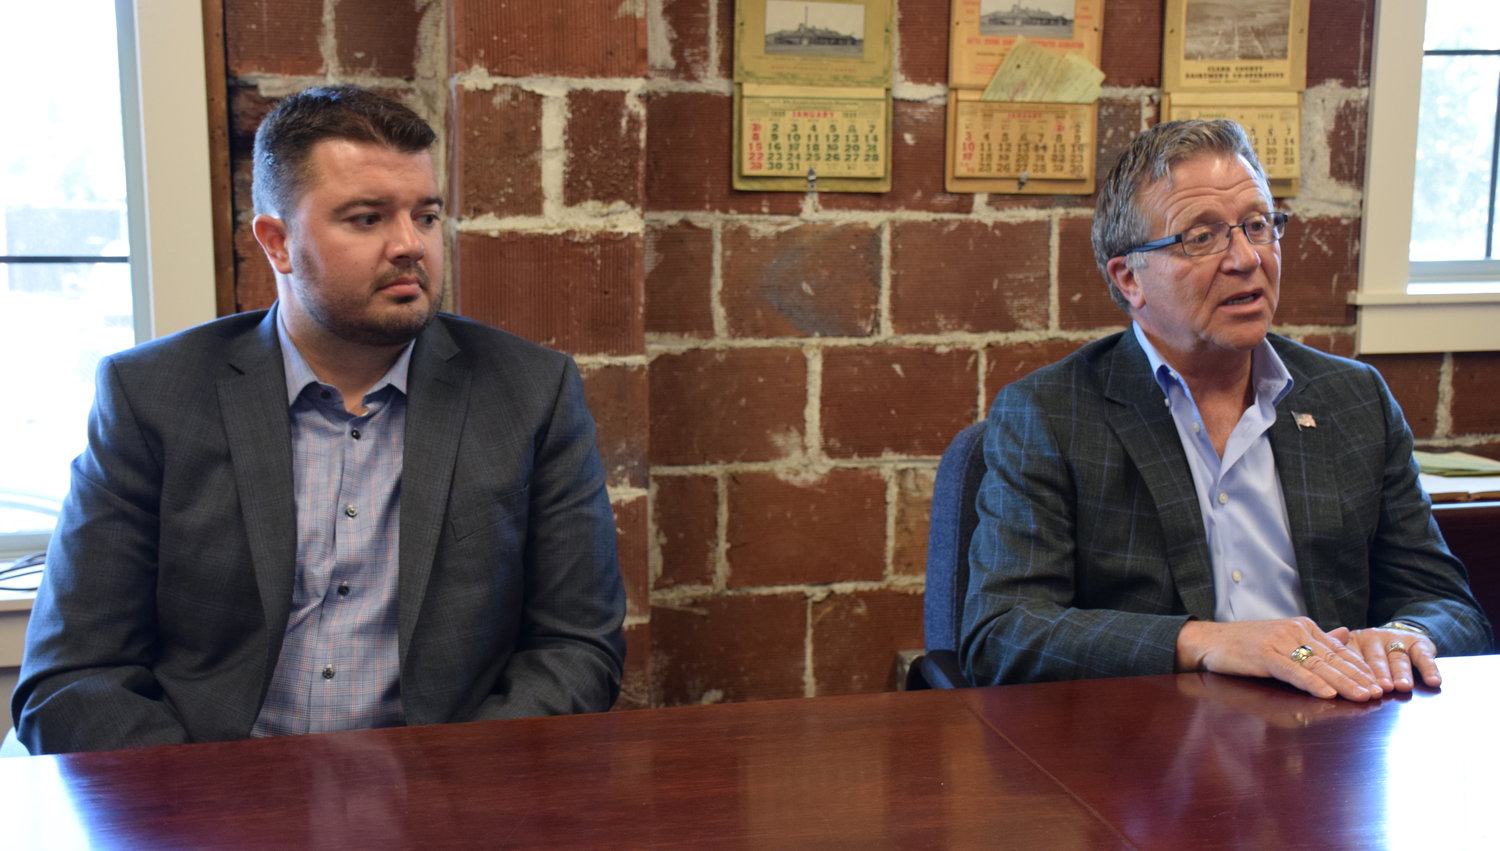 Washington State Rep. Brandon Vick, left, speaks to The Reflector as part of a cross-county tour to visit with local media June 14, 2019.